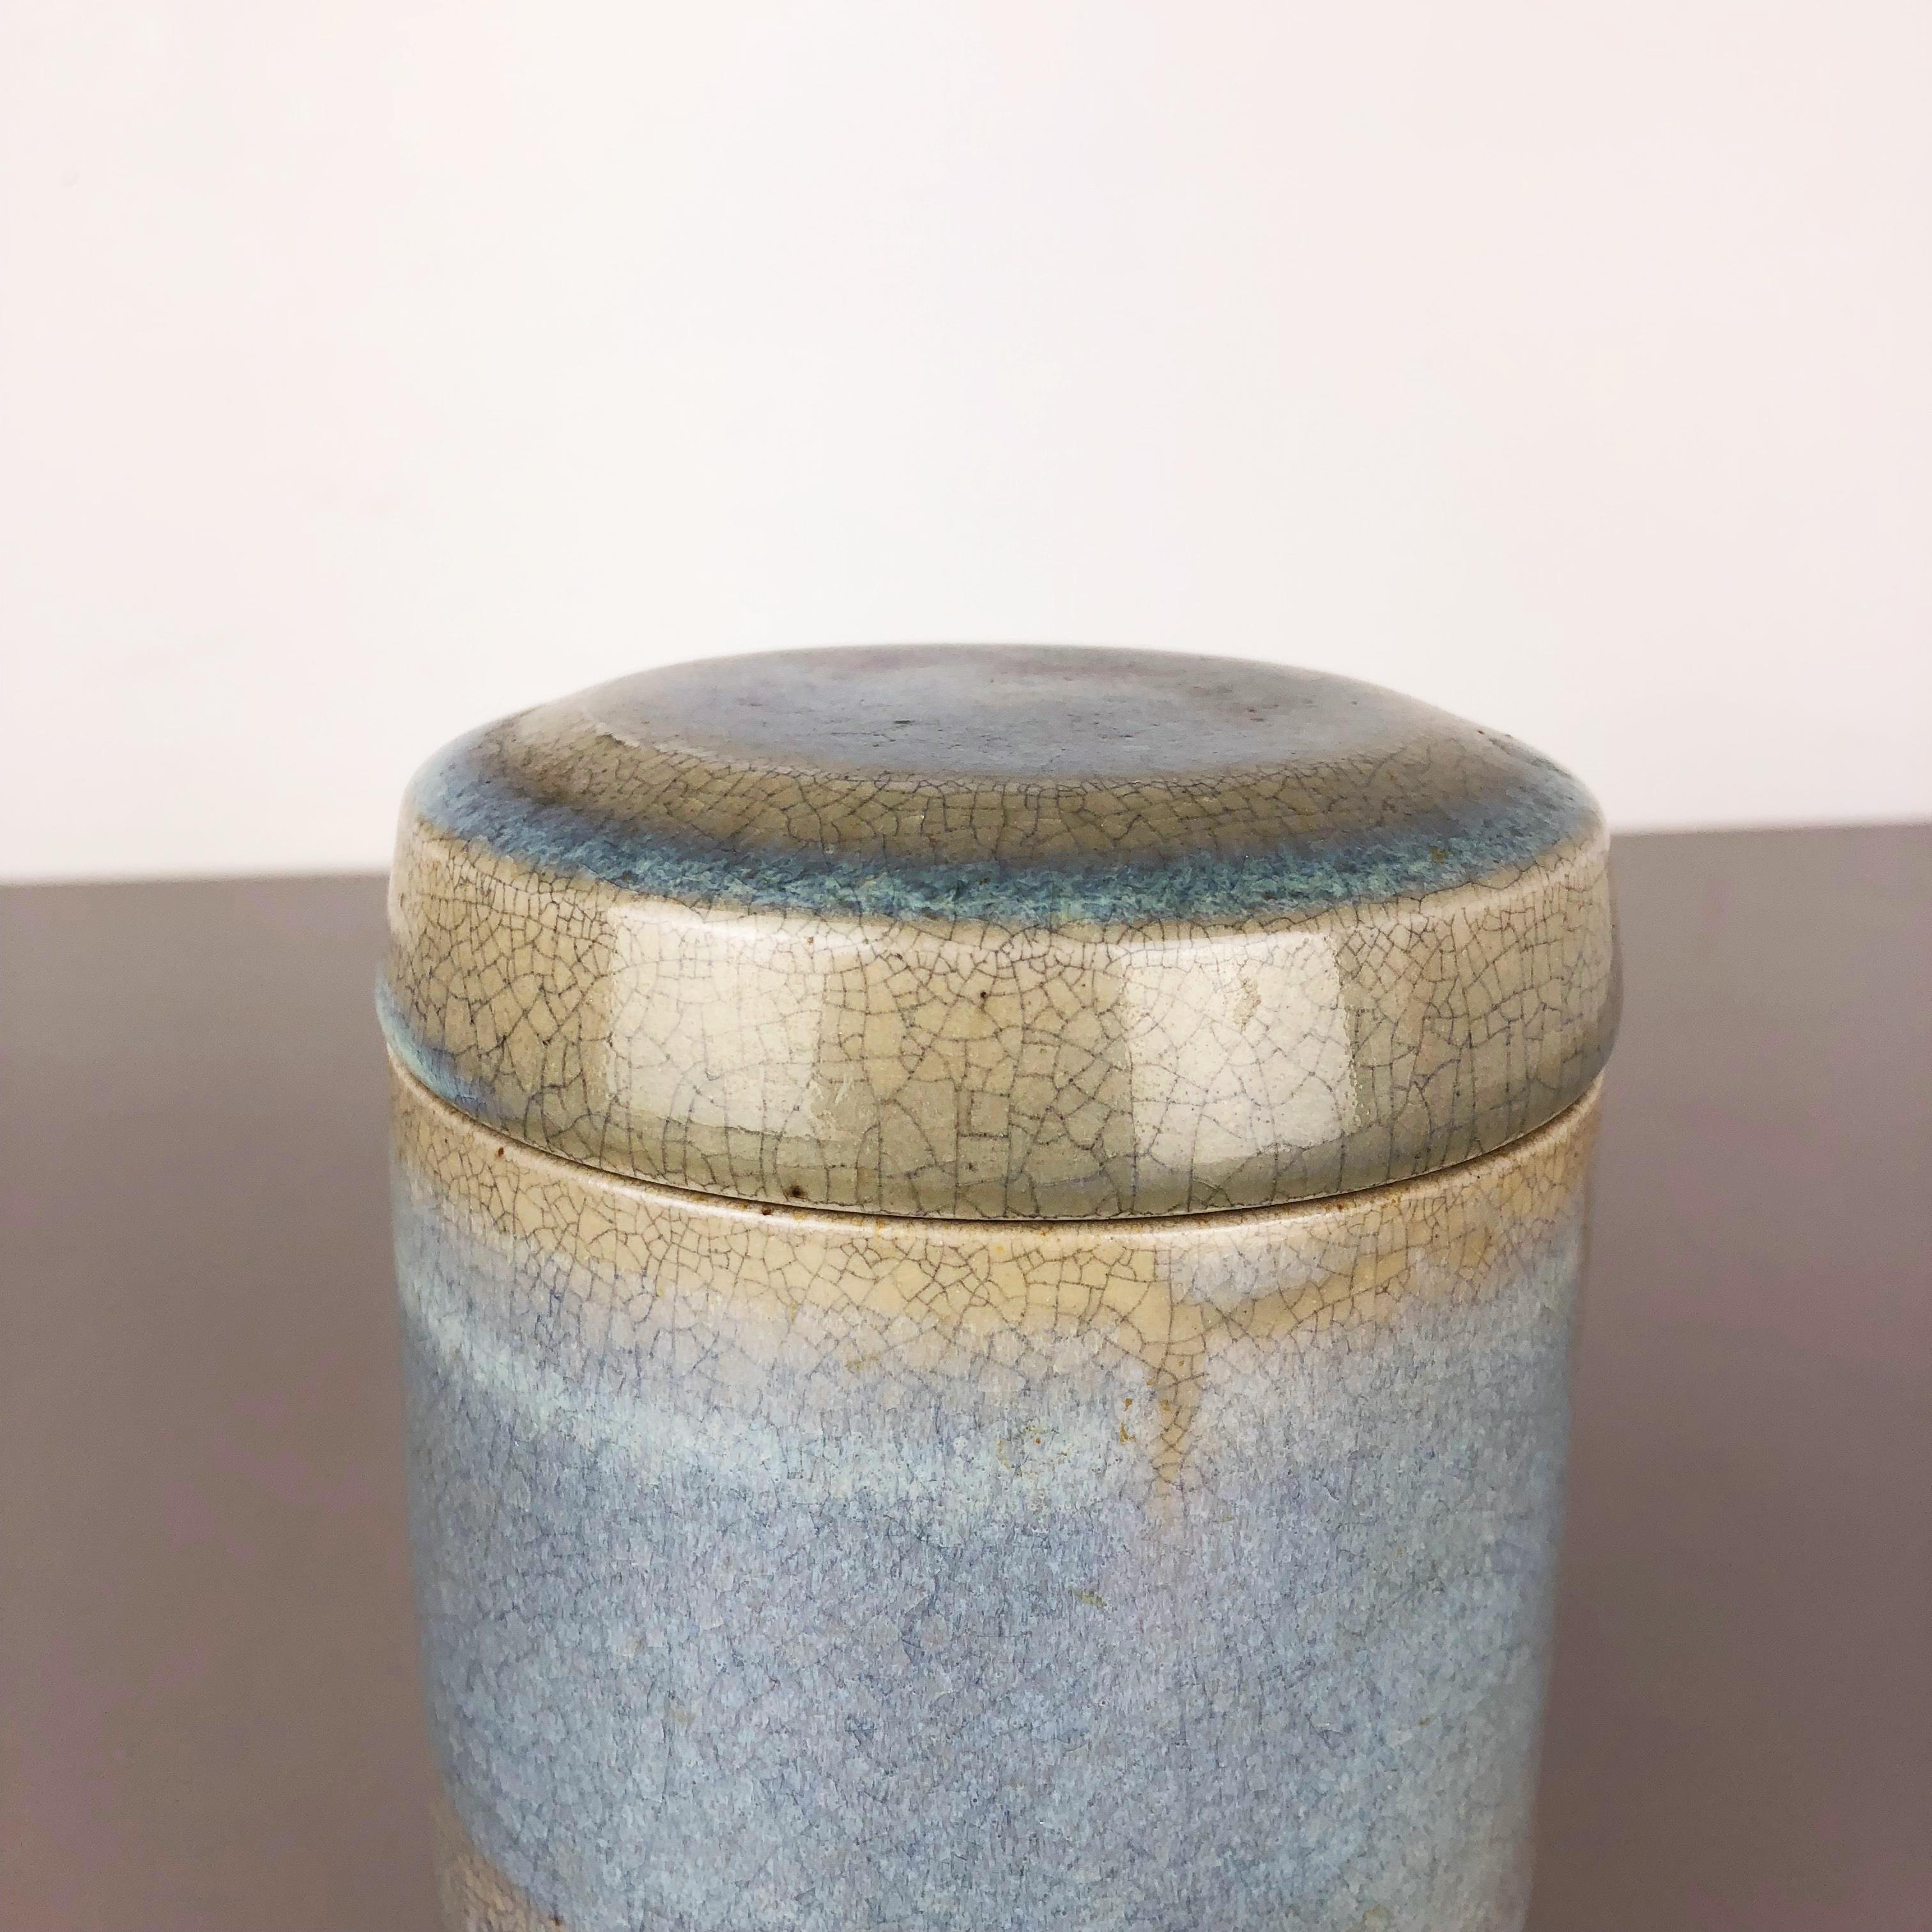 Abstract Ceramic Studio Pottery Lid Can by Wendelin Stahl, Germany, 1970s For Sale 5